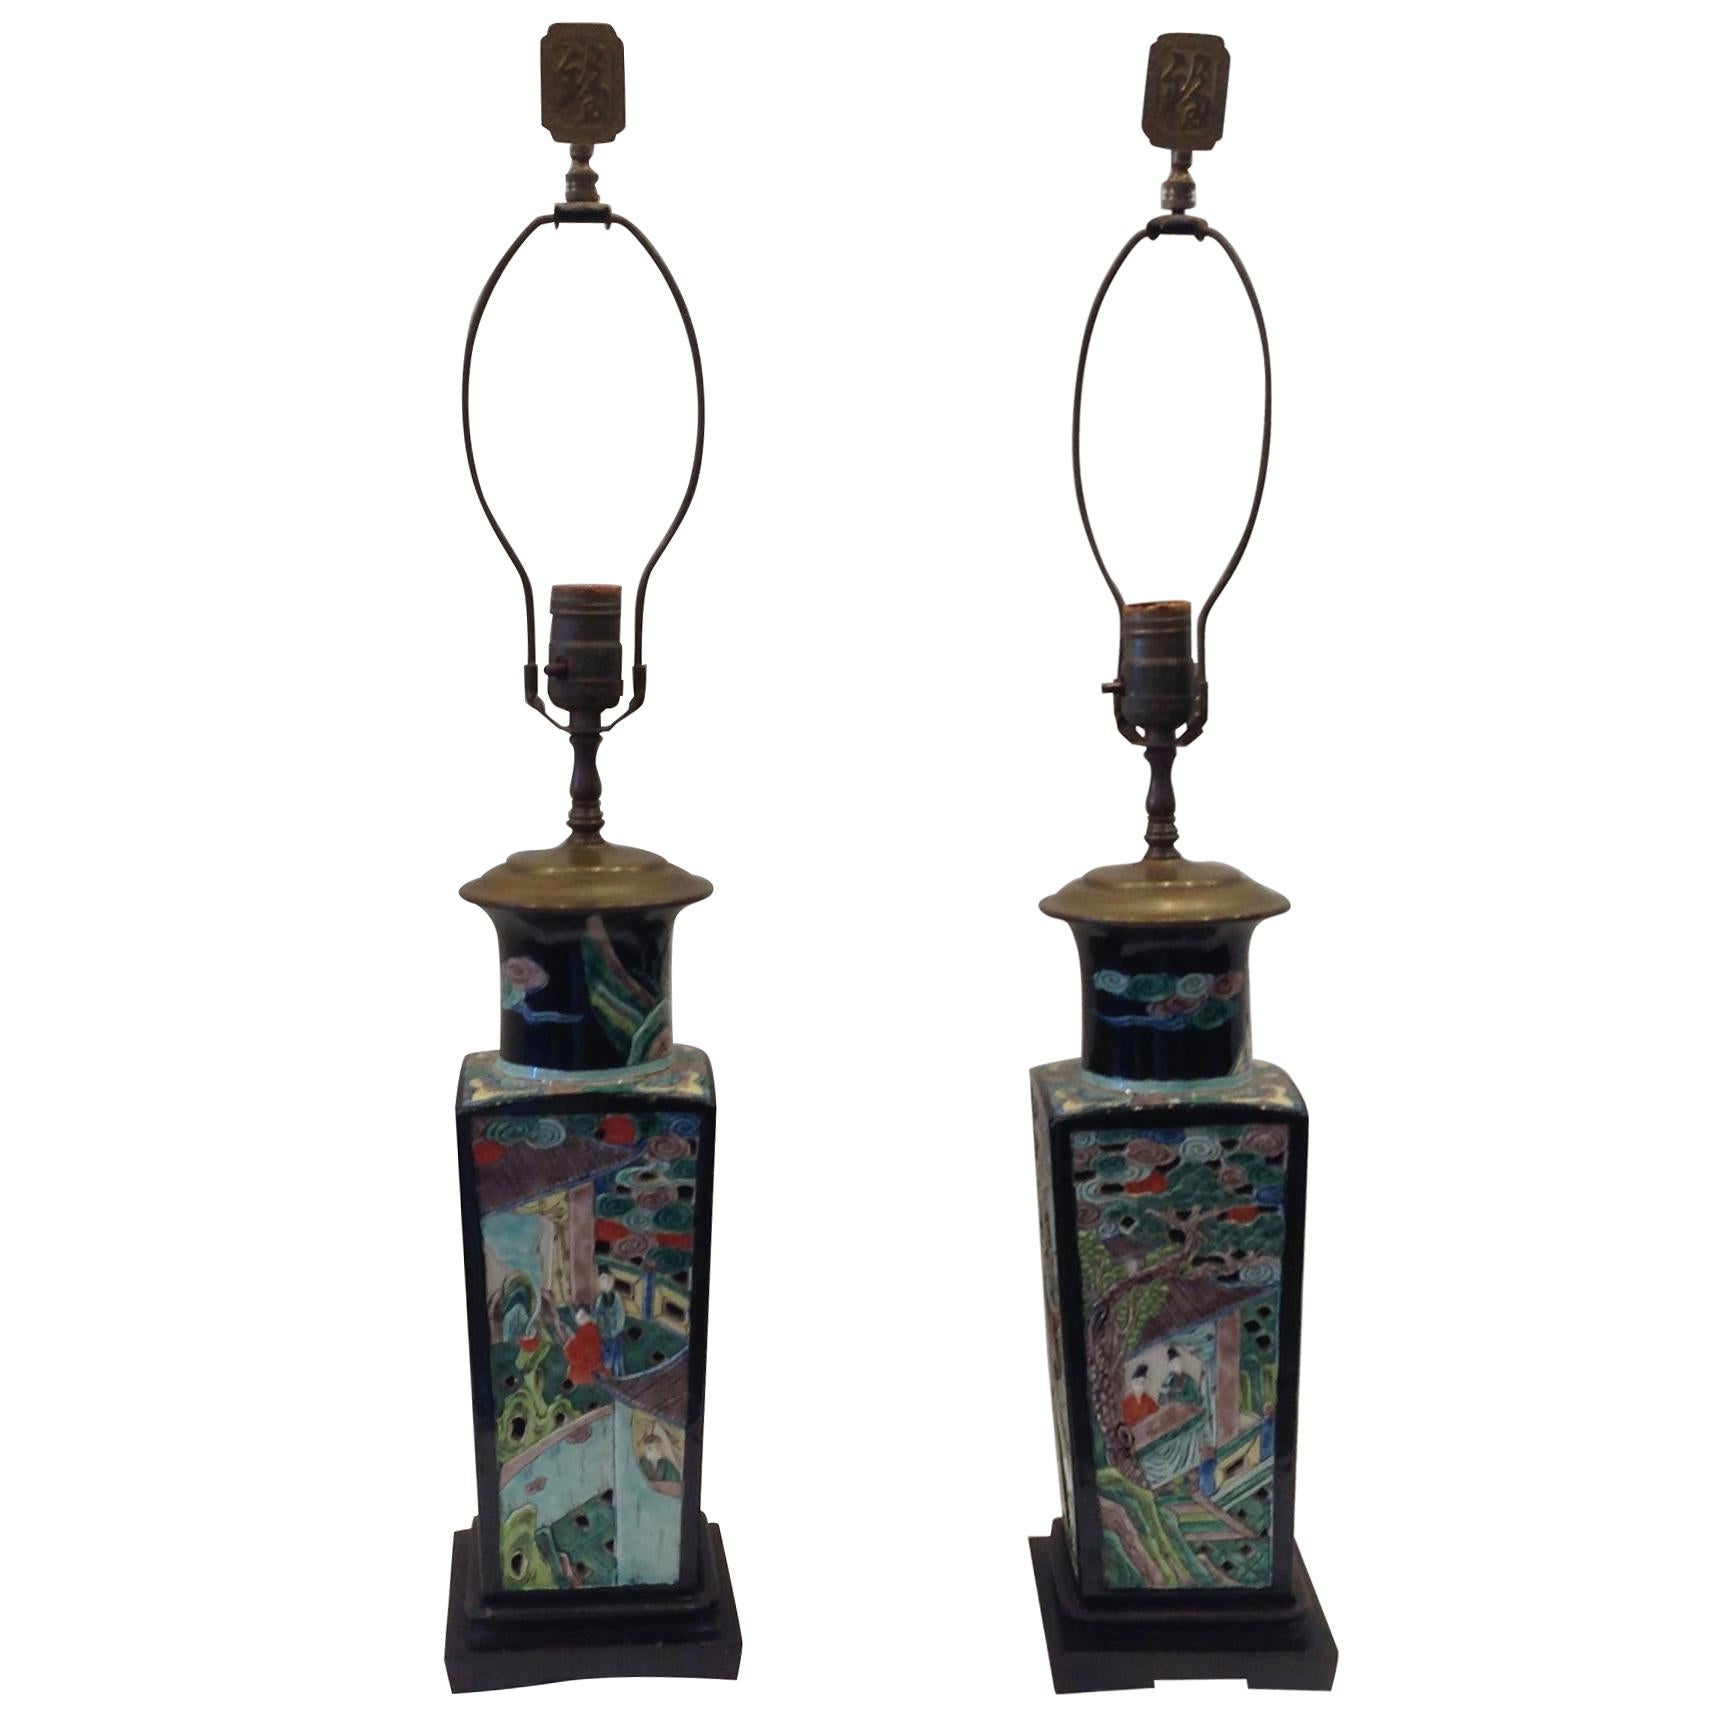 Pair of Famille Noire Chinese Lamps